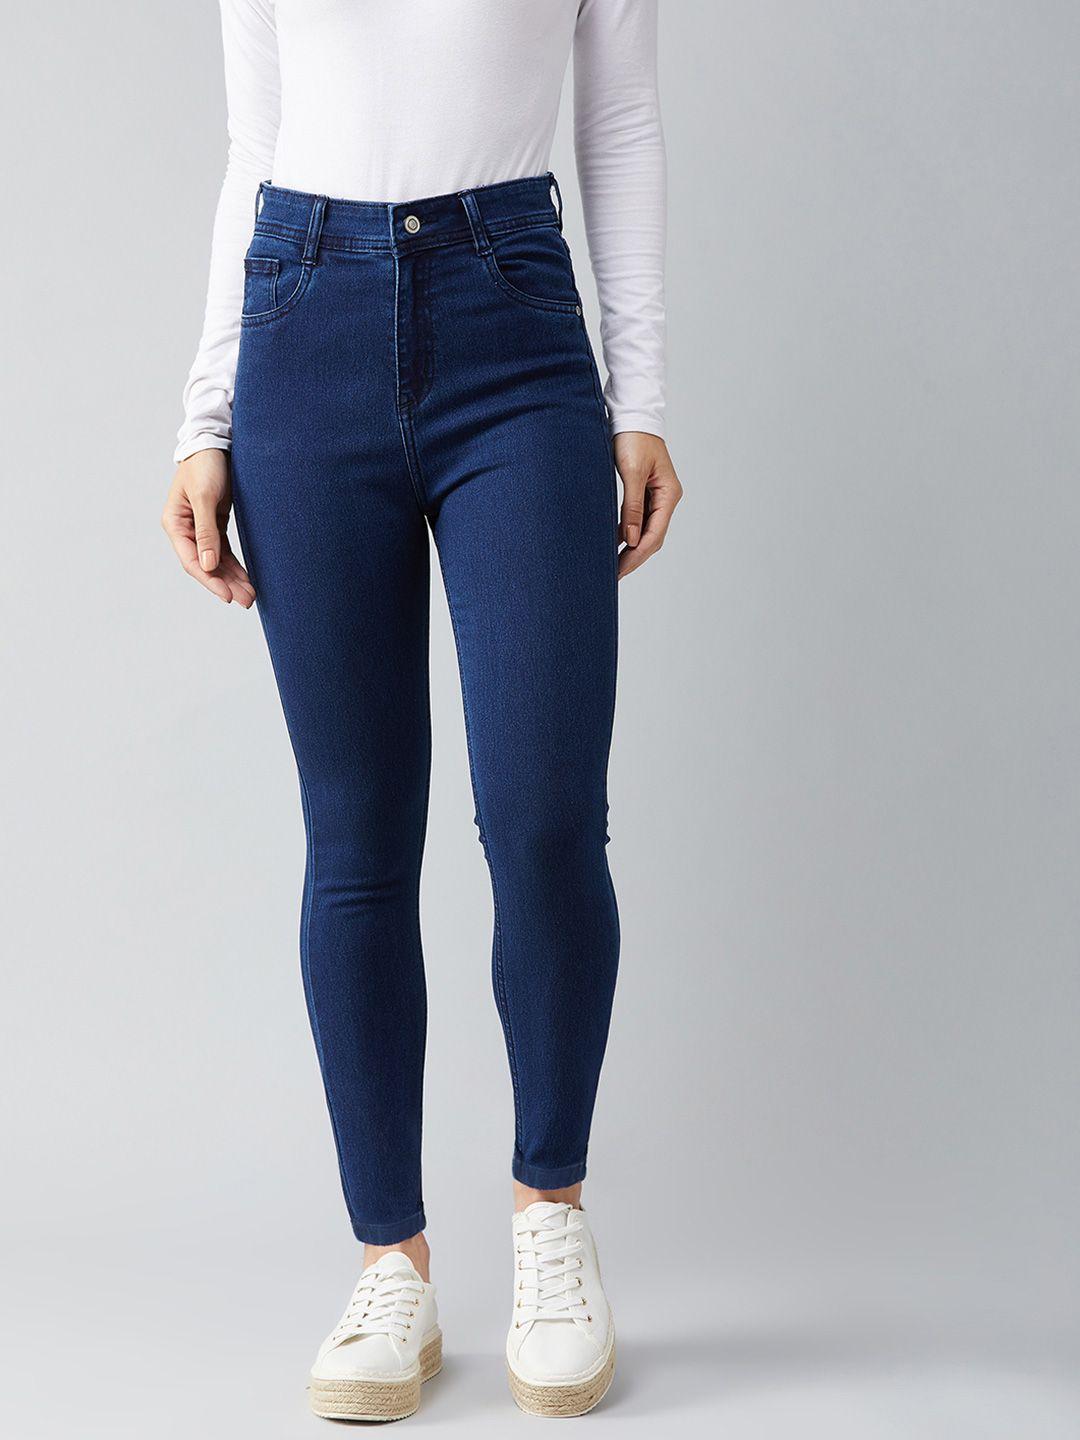 dolce-crudo-navy-blue-skinny-fit-high-rise-stretchable-jeans